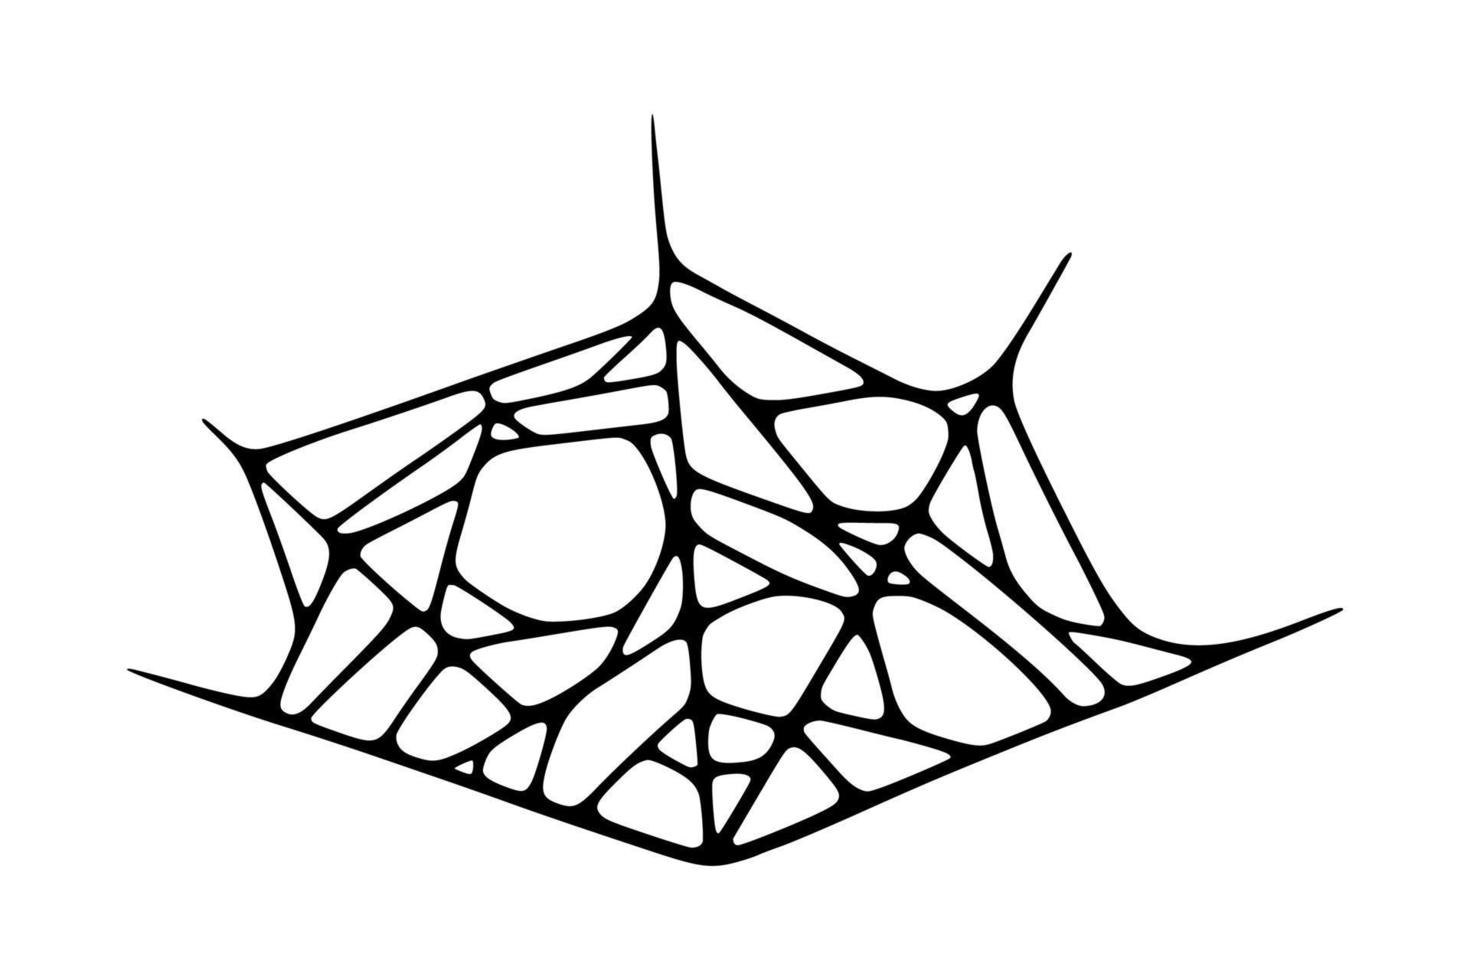 Spider web isolated on white background. Spooky Halloween cobweb. Vector illustration